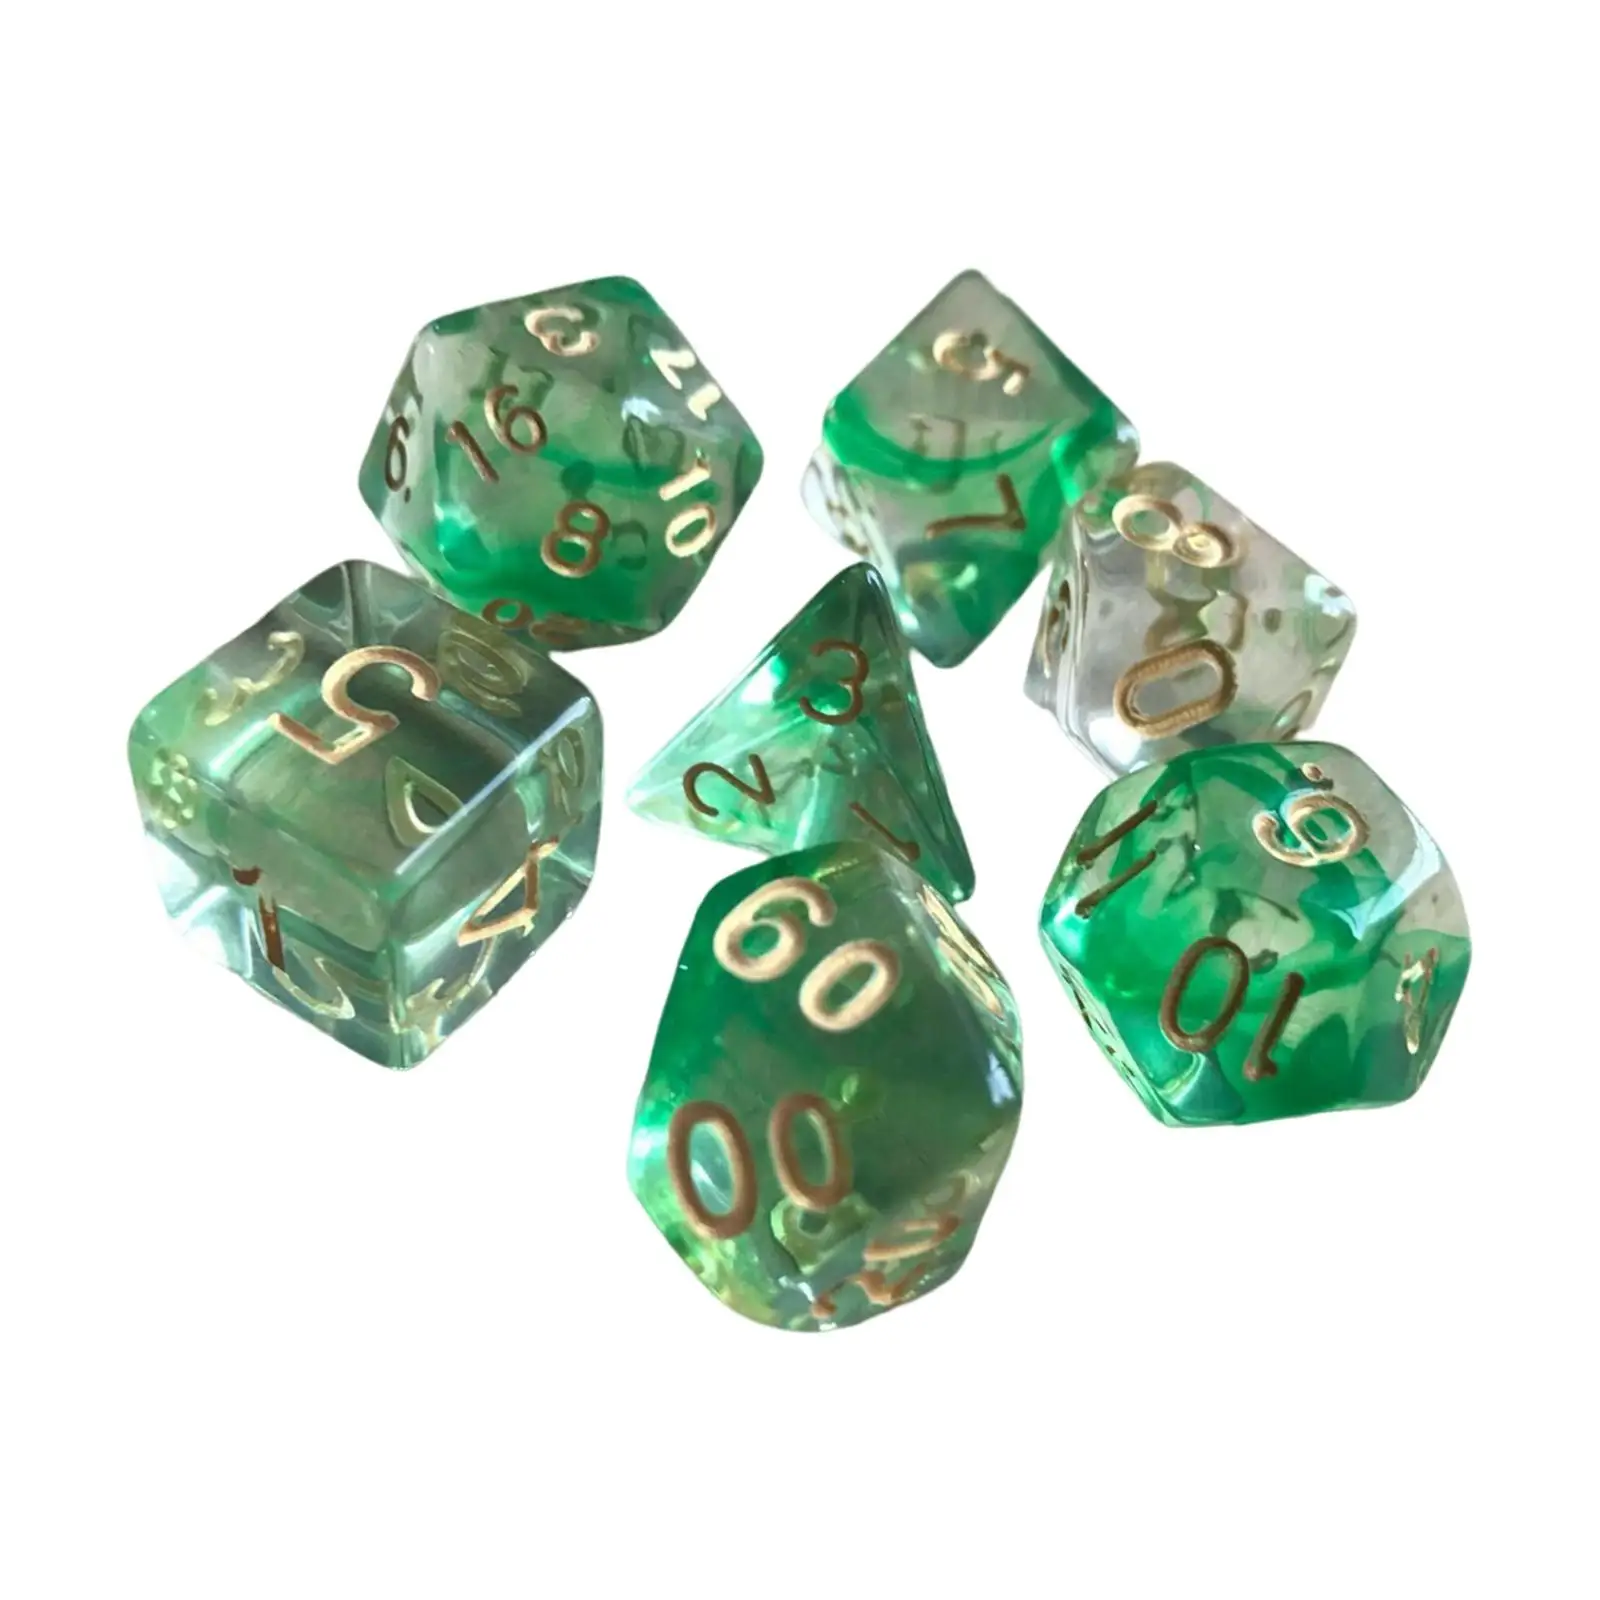 7 Pieces Acrylic Polyhedral   Game  D8 D10 D12 D20 for Party